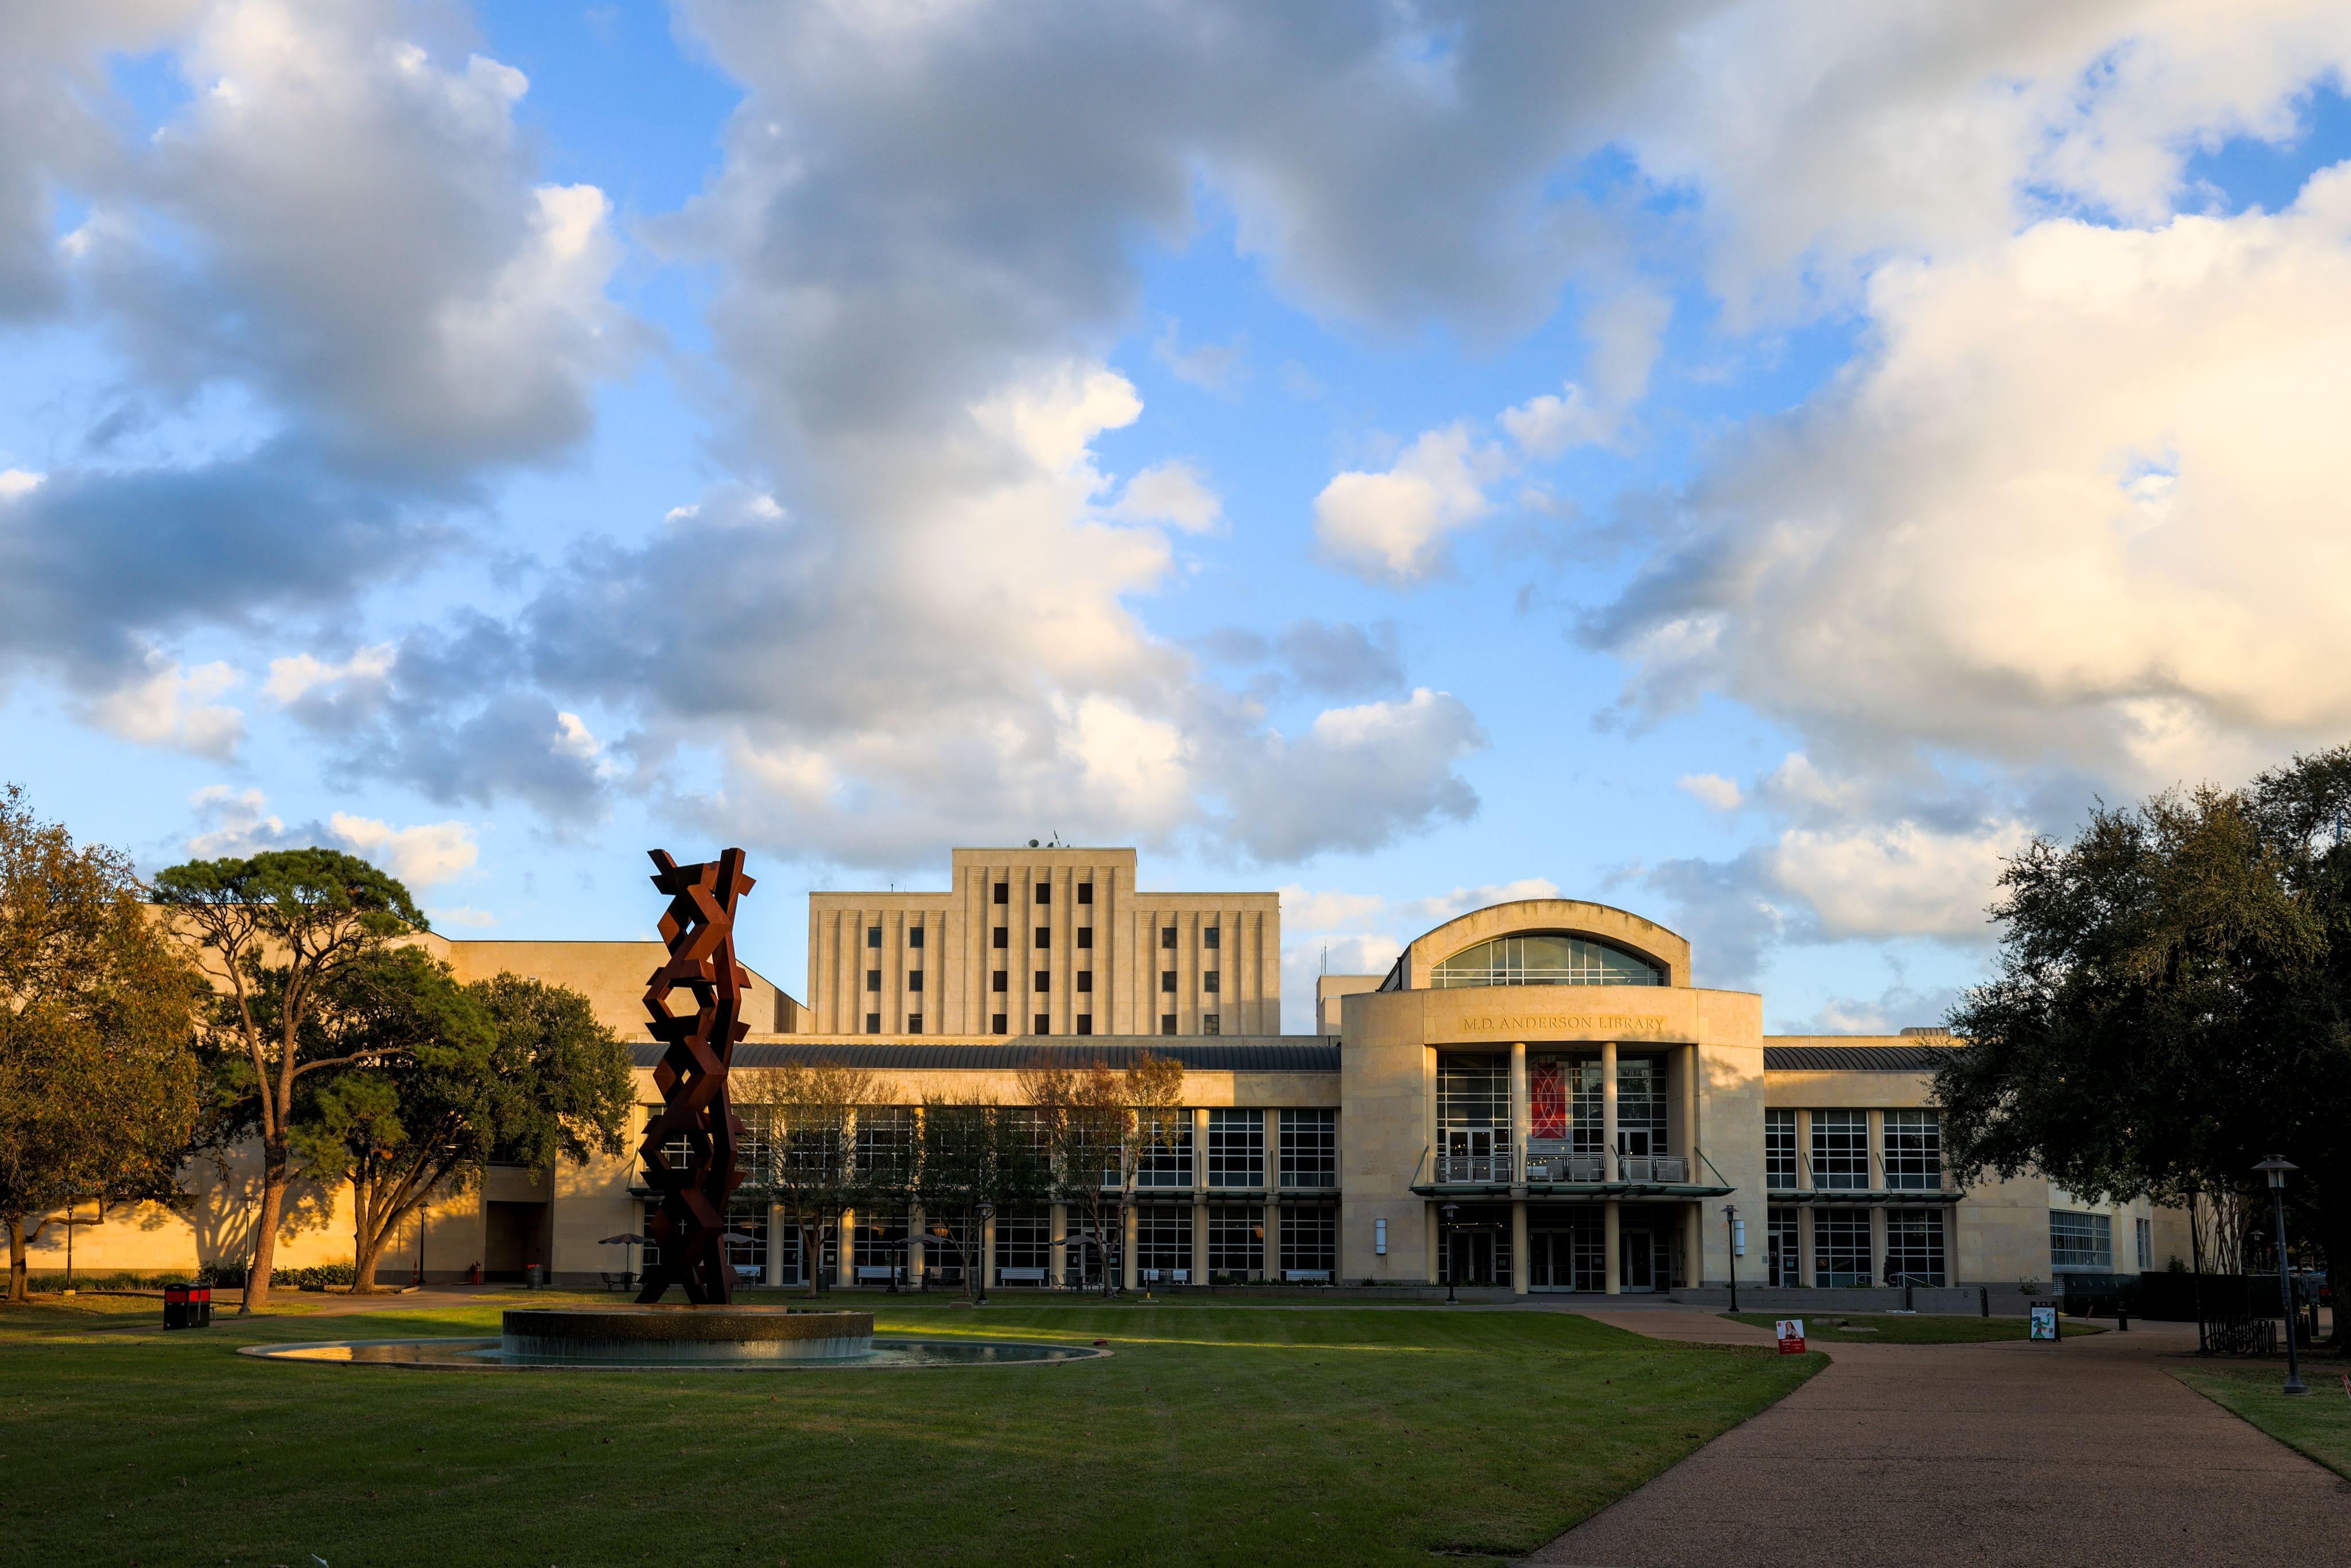 MD Anderson Library on the University of Houston campus with some clouds above in an otherwise blue sky.